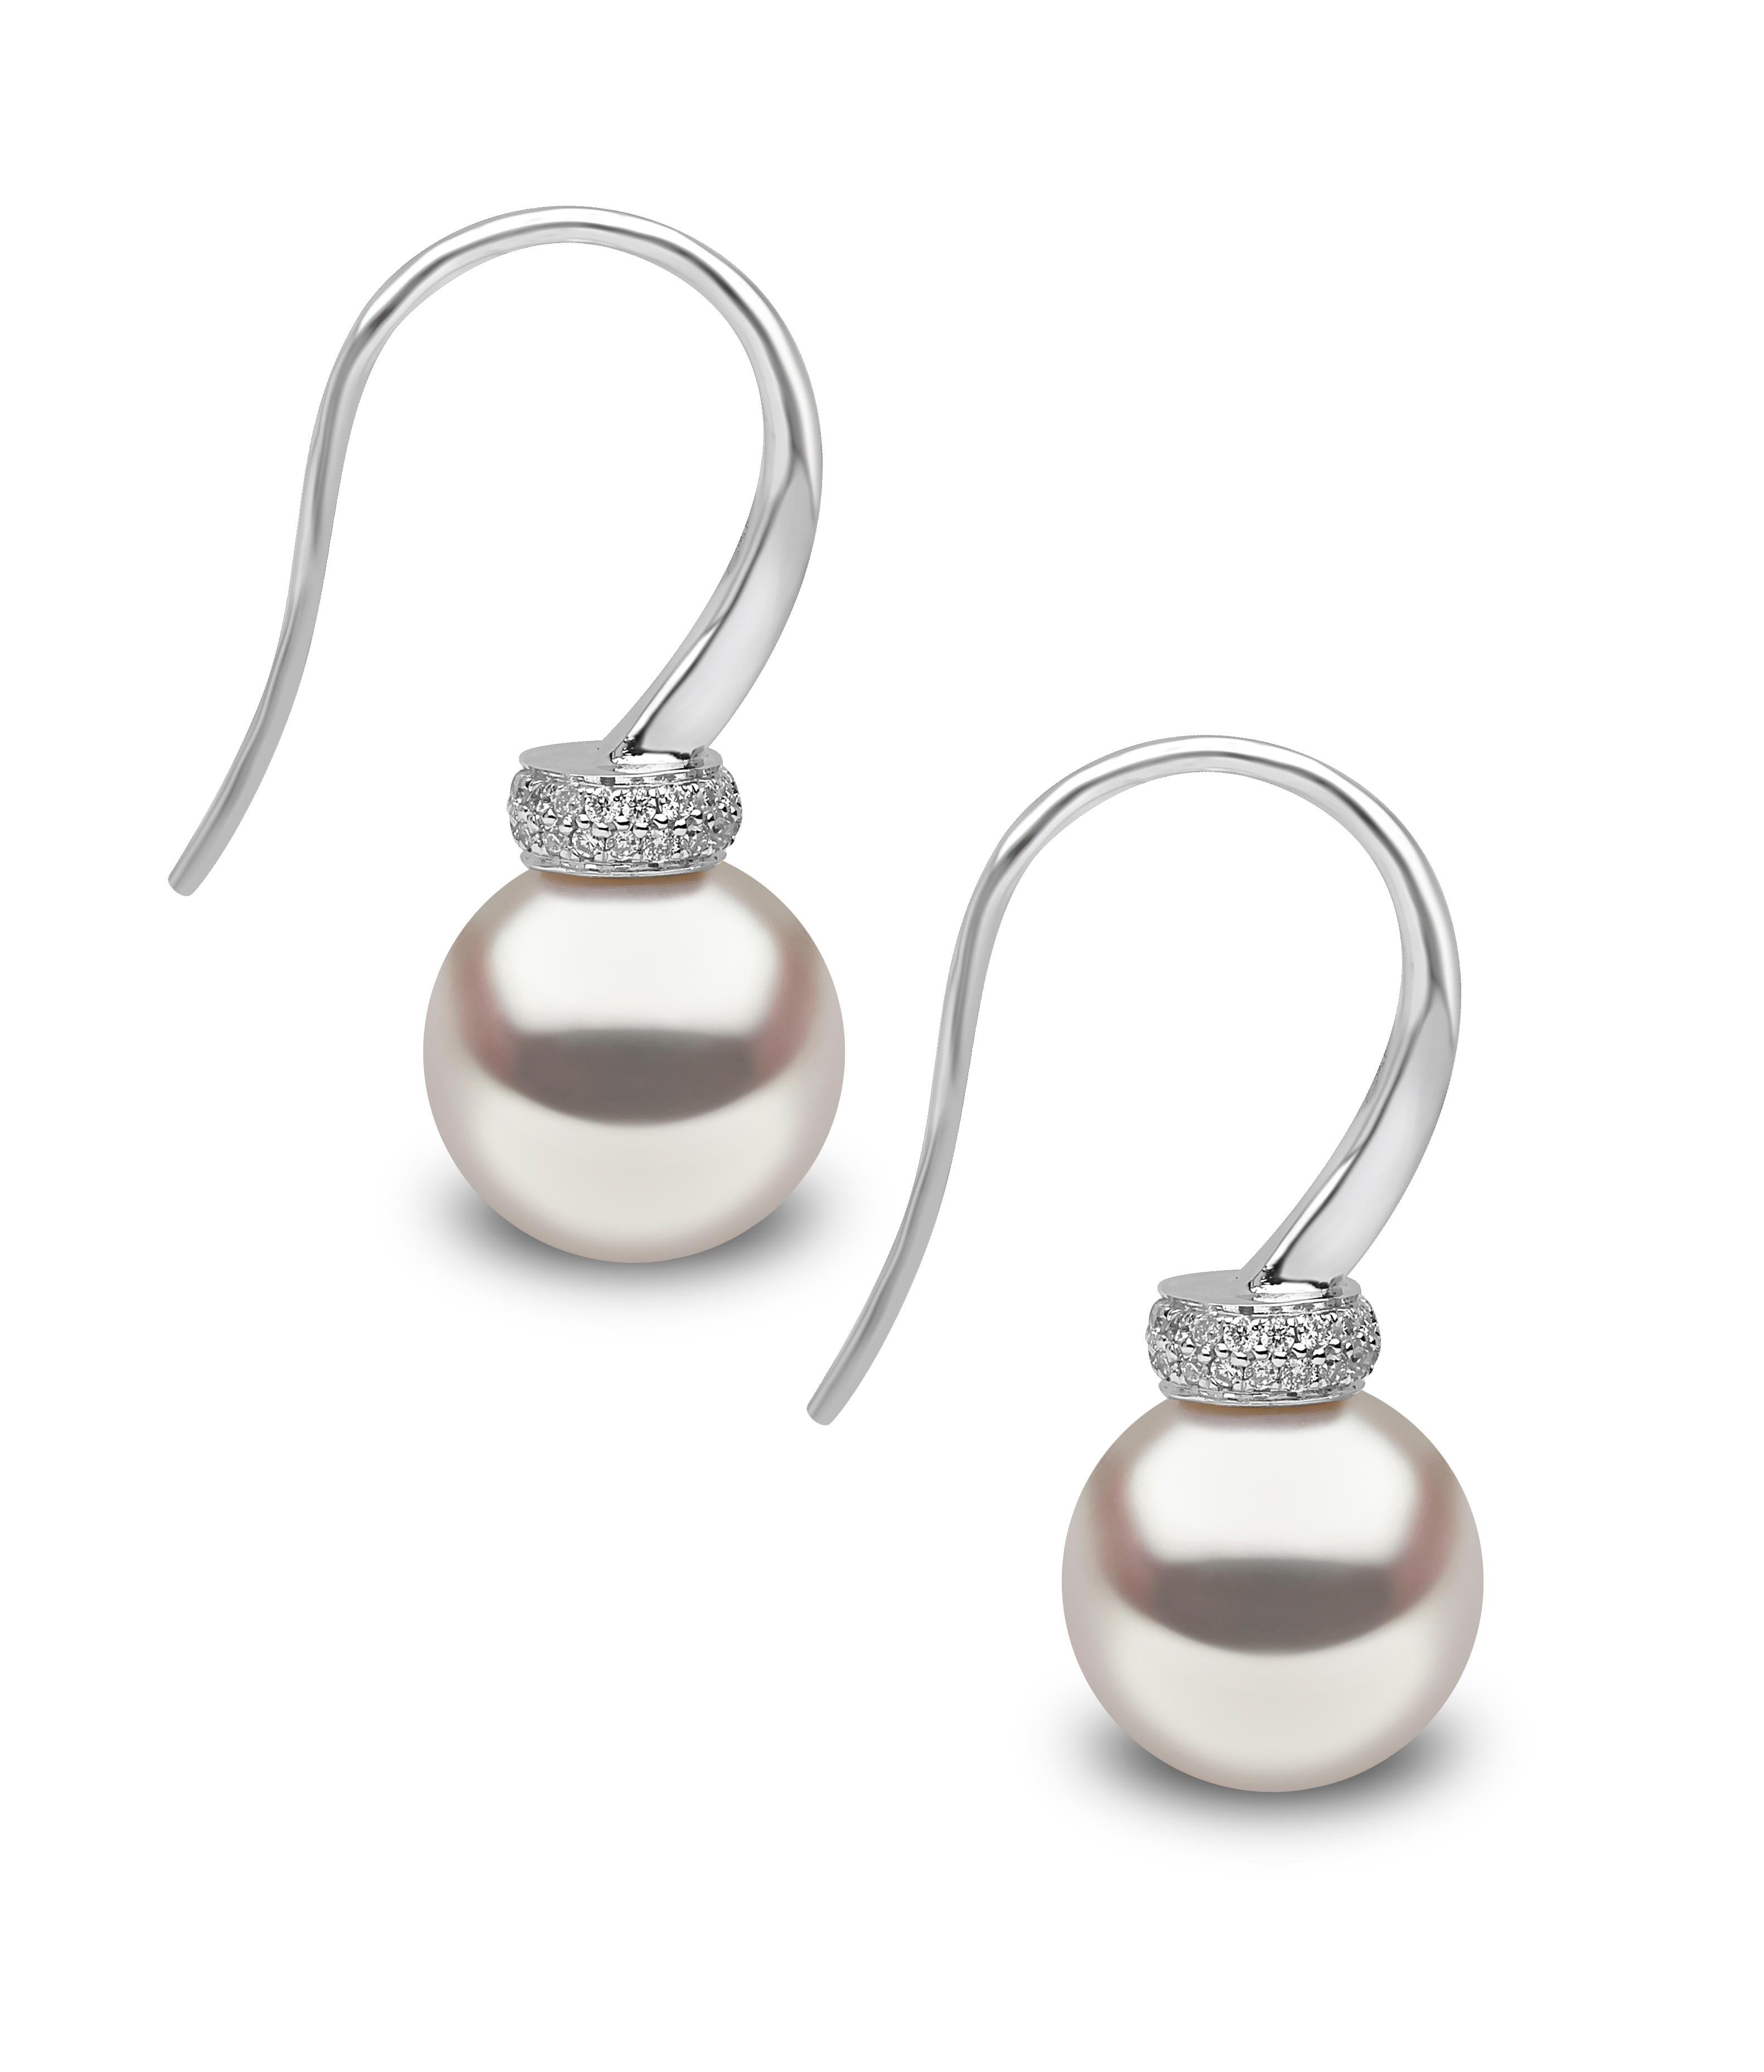 These elegant earrings by Yoko London feature lustrous Freshwater pearls beneath pave set diamonds. Simple enough for a casual day look, whilst also being glamorous enough to enhance evening attire, these earrings are a truly versatile piece which